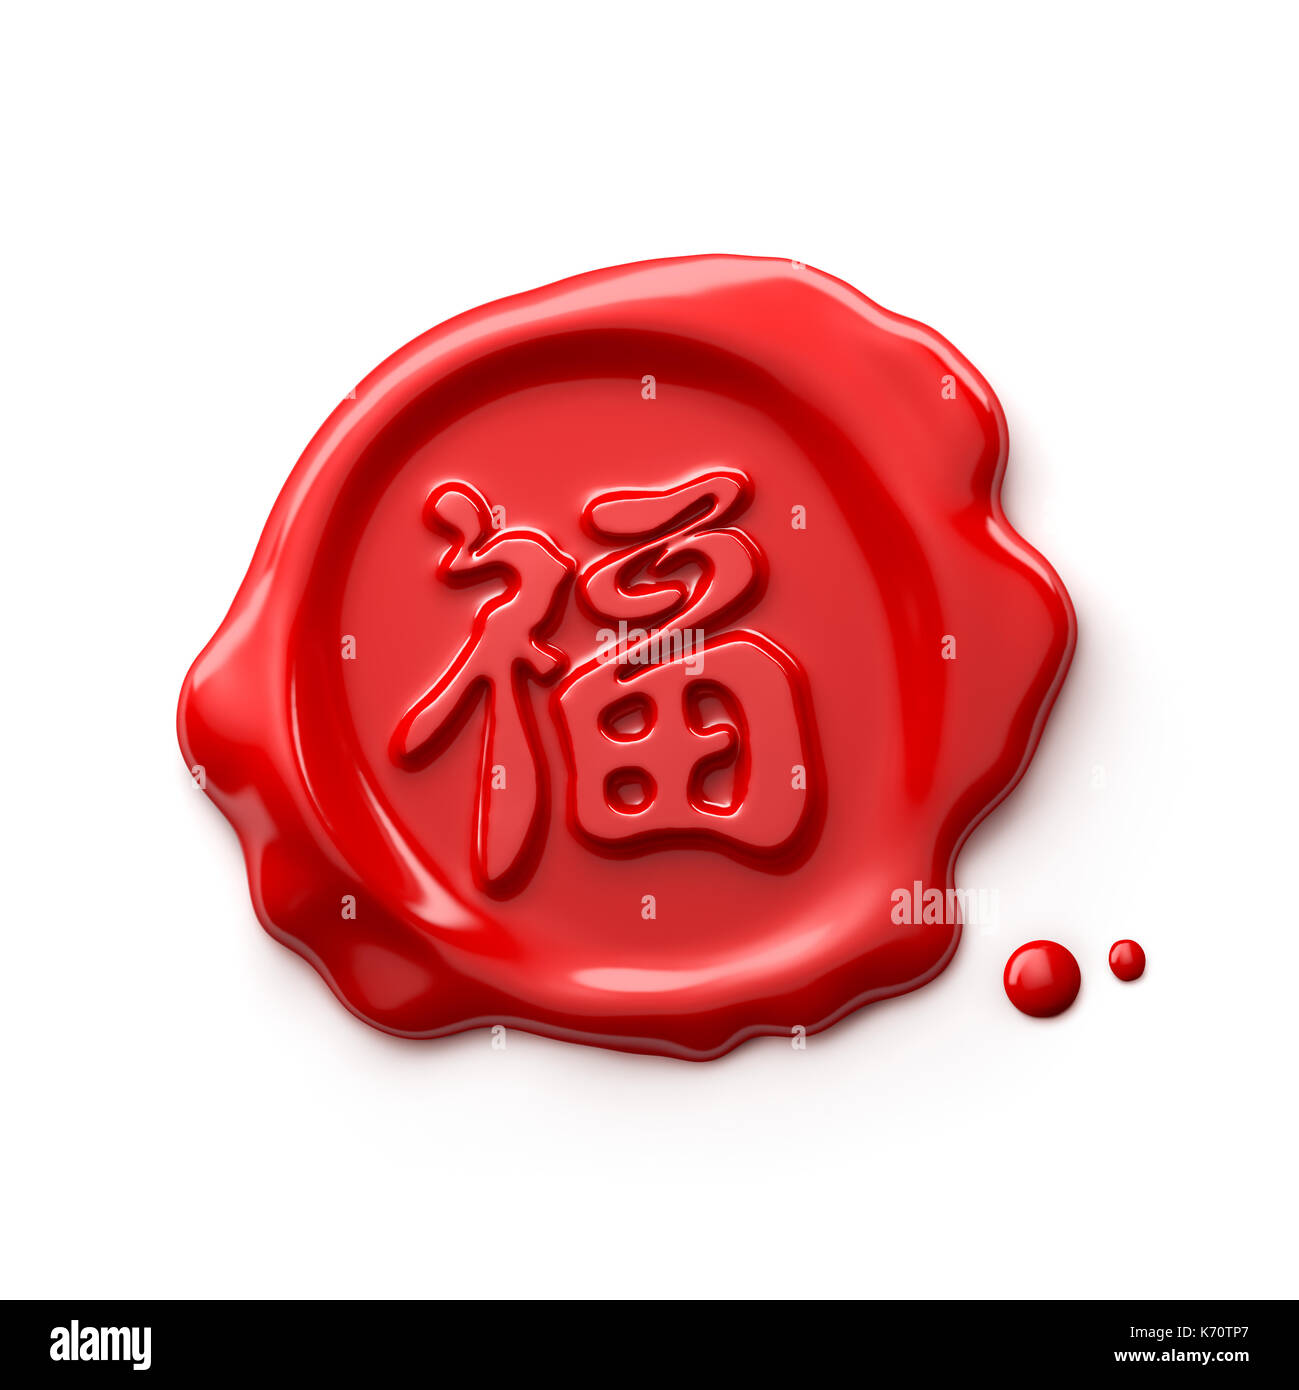 Wax seal isolated on white background, Chinese calligraphy 'FU' (Foreign text means Prosperity) Stock Photo